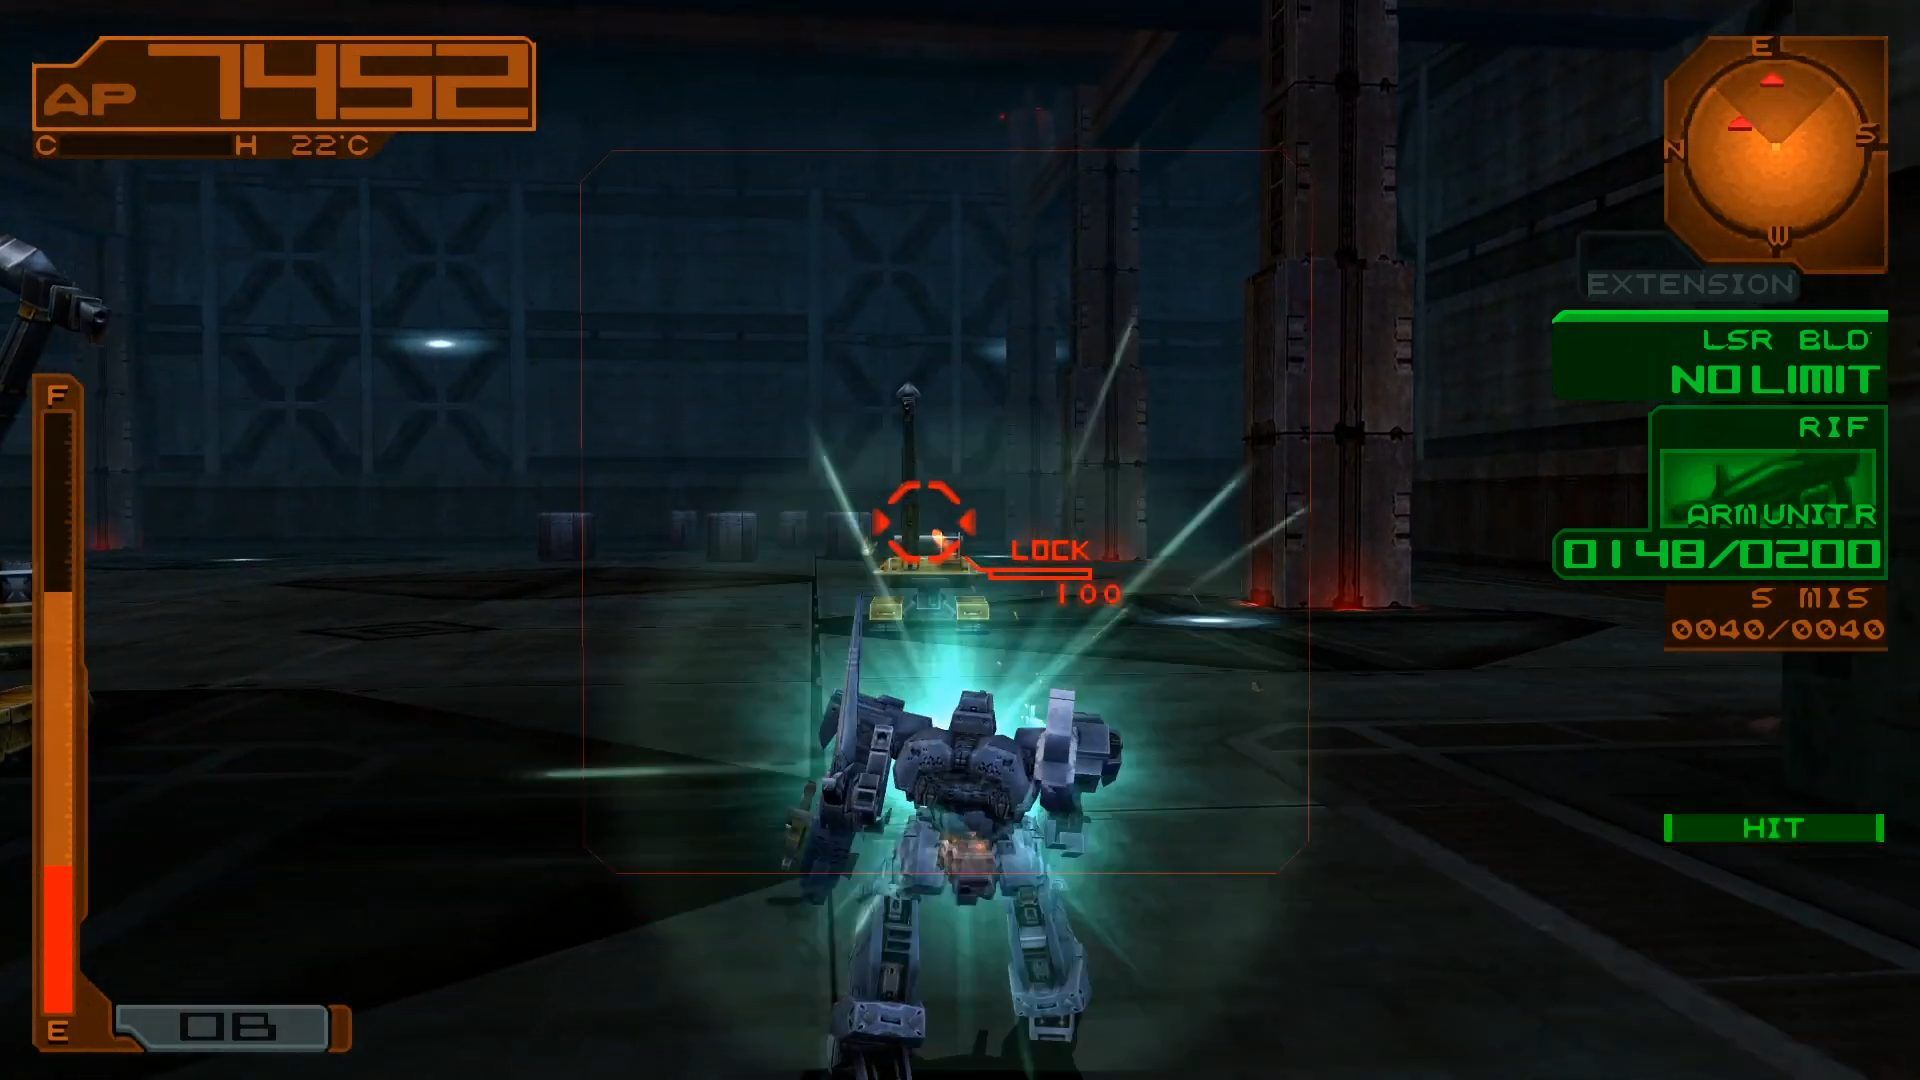 A blue Armored Core mech is seen glowing blue while fighting a machine that looks like a large construction vehicle while in a empty metal factory.